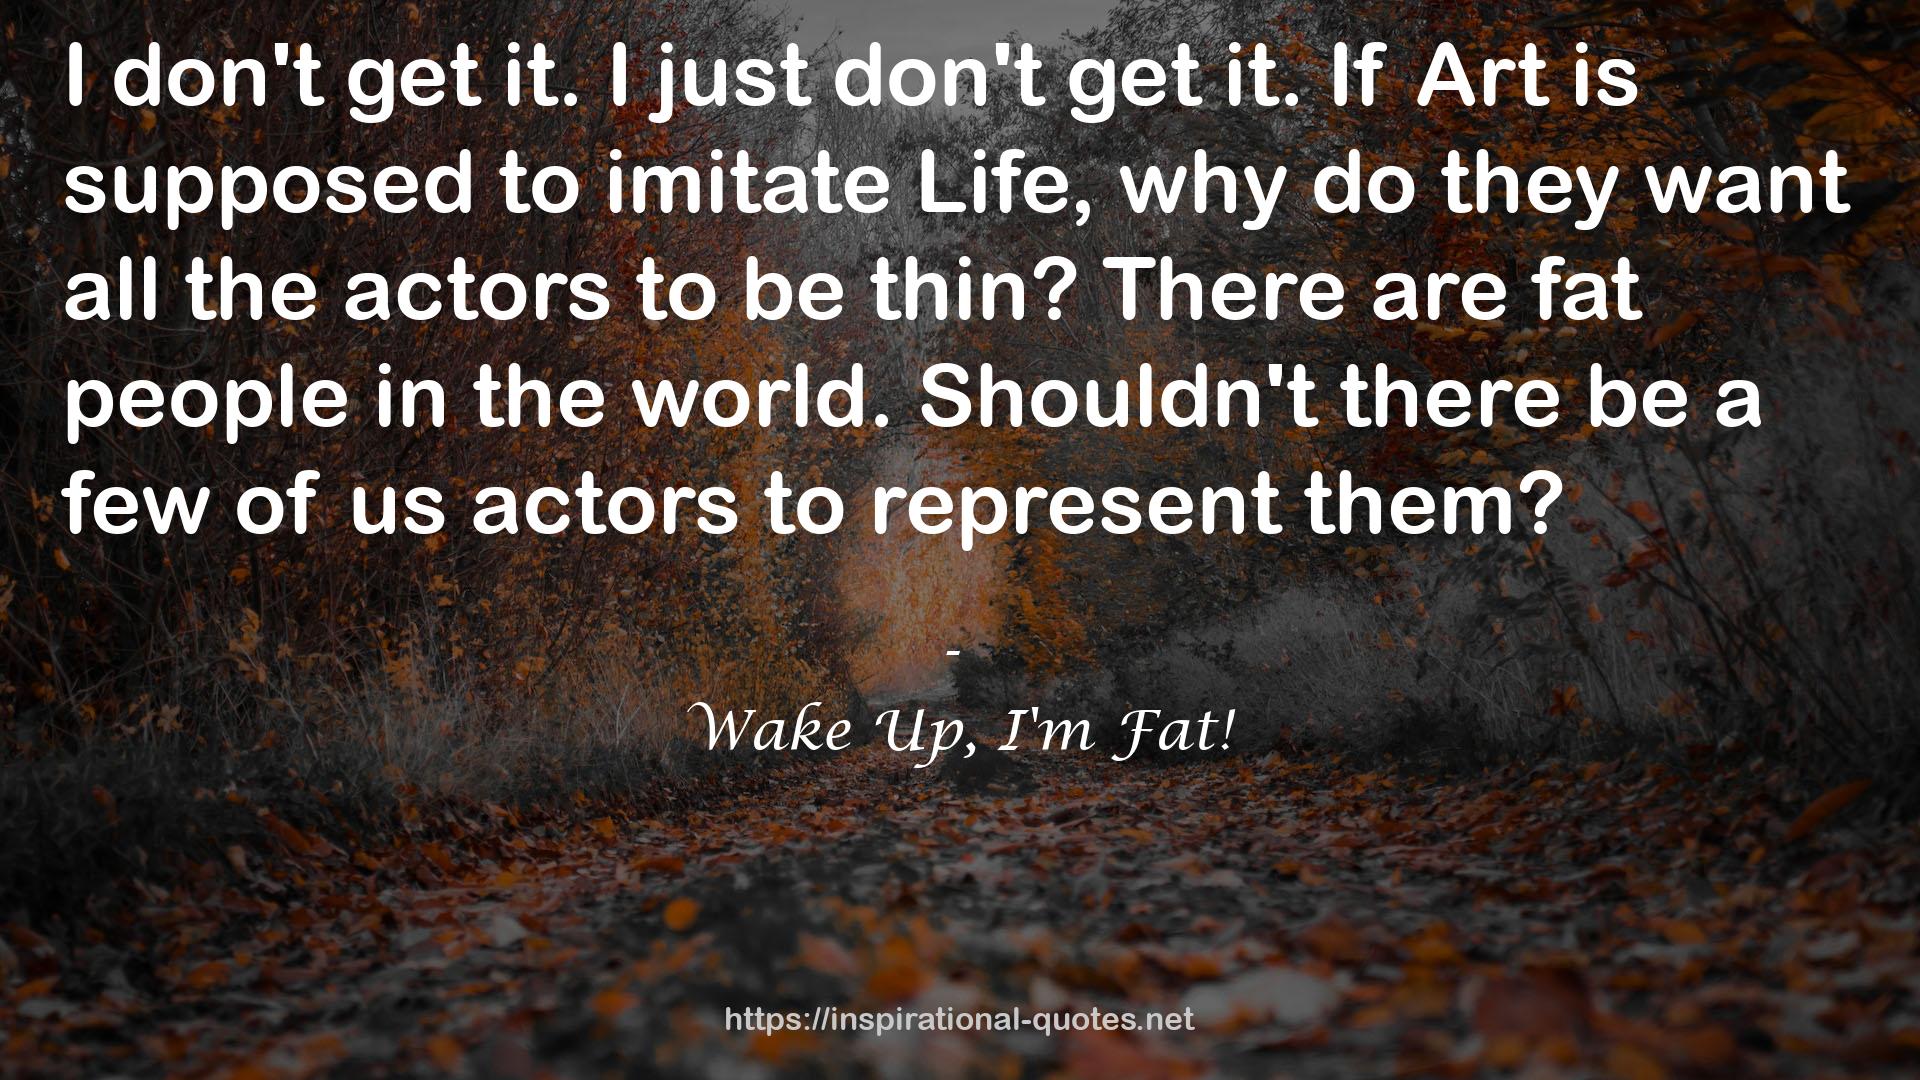 Wake Up, I'm Fat! QUOTES